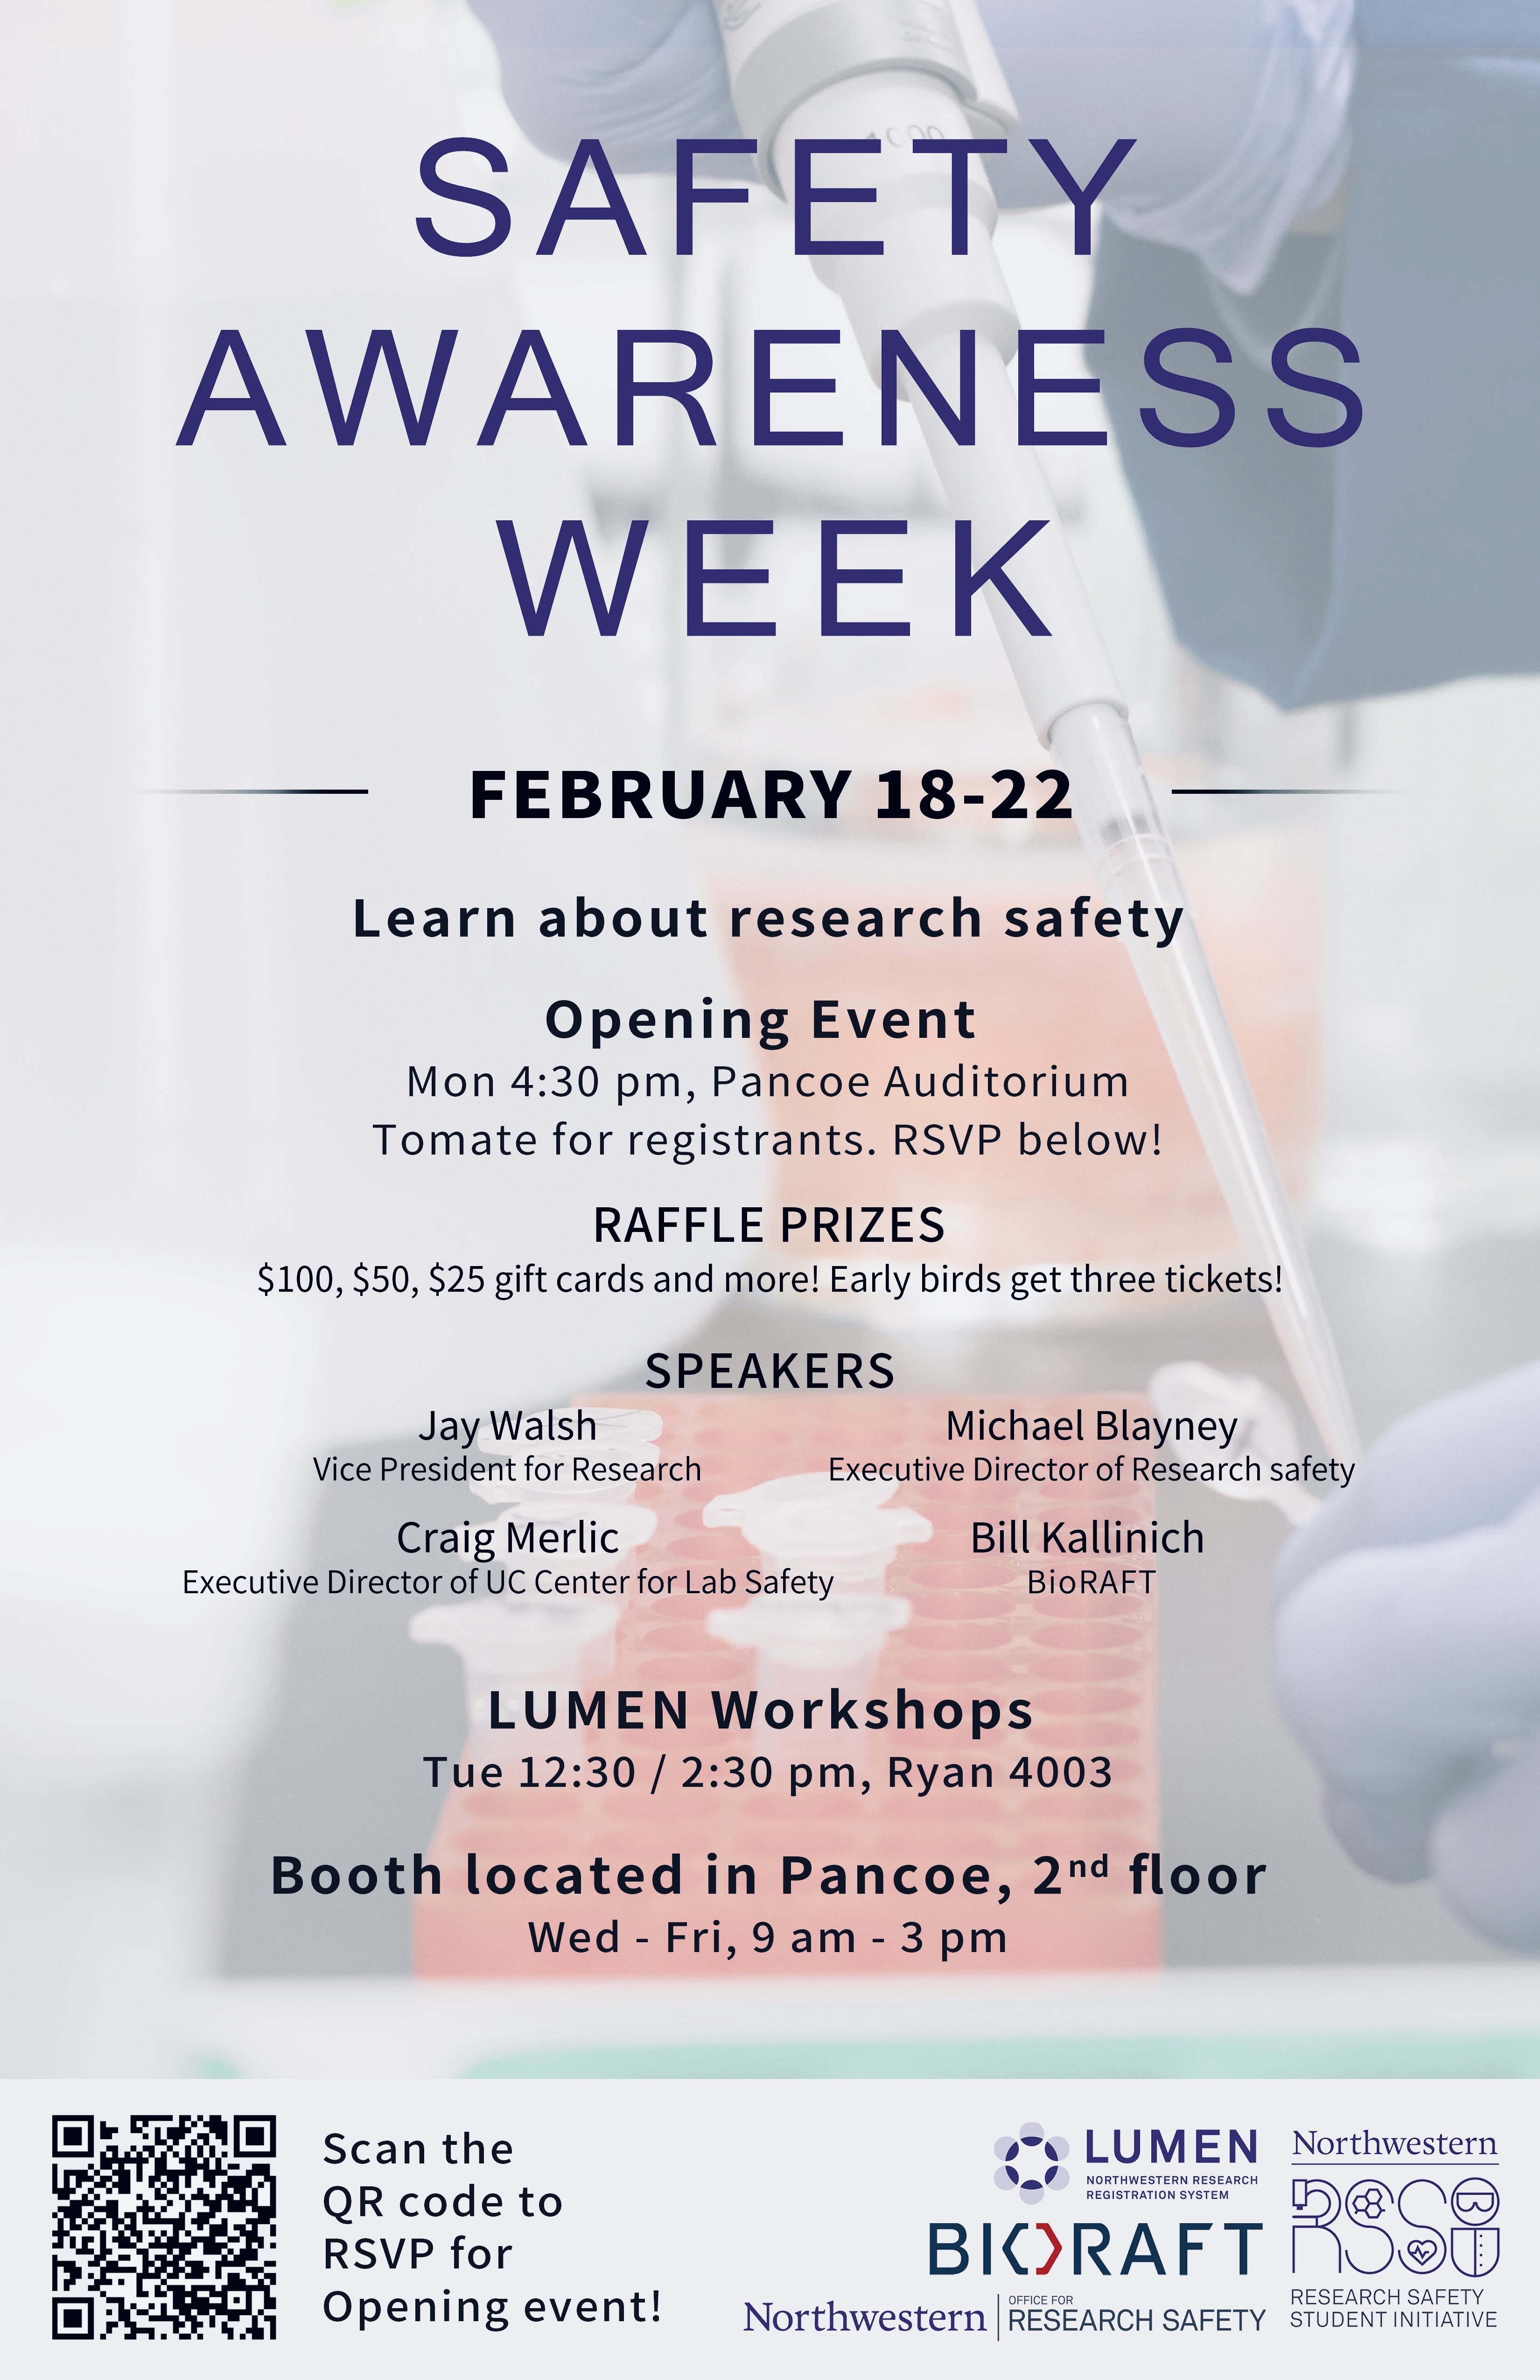 Safety Awareness Week Begins February 18th Department of Chemistry